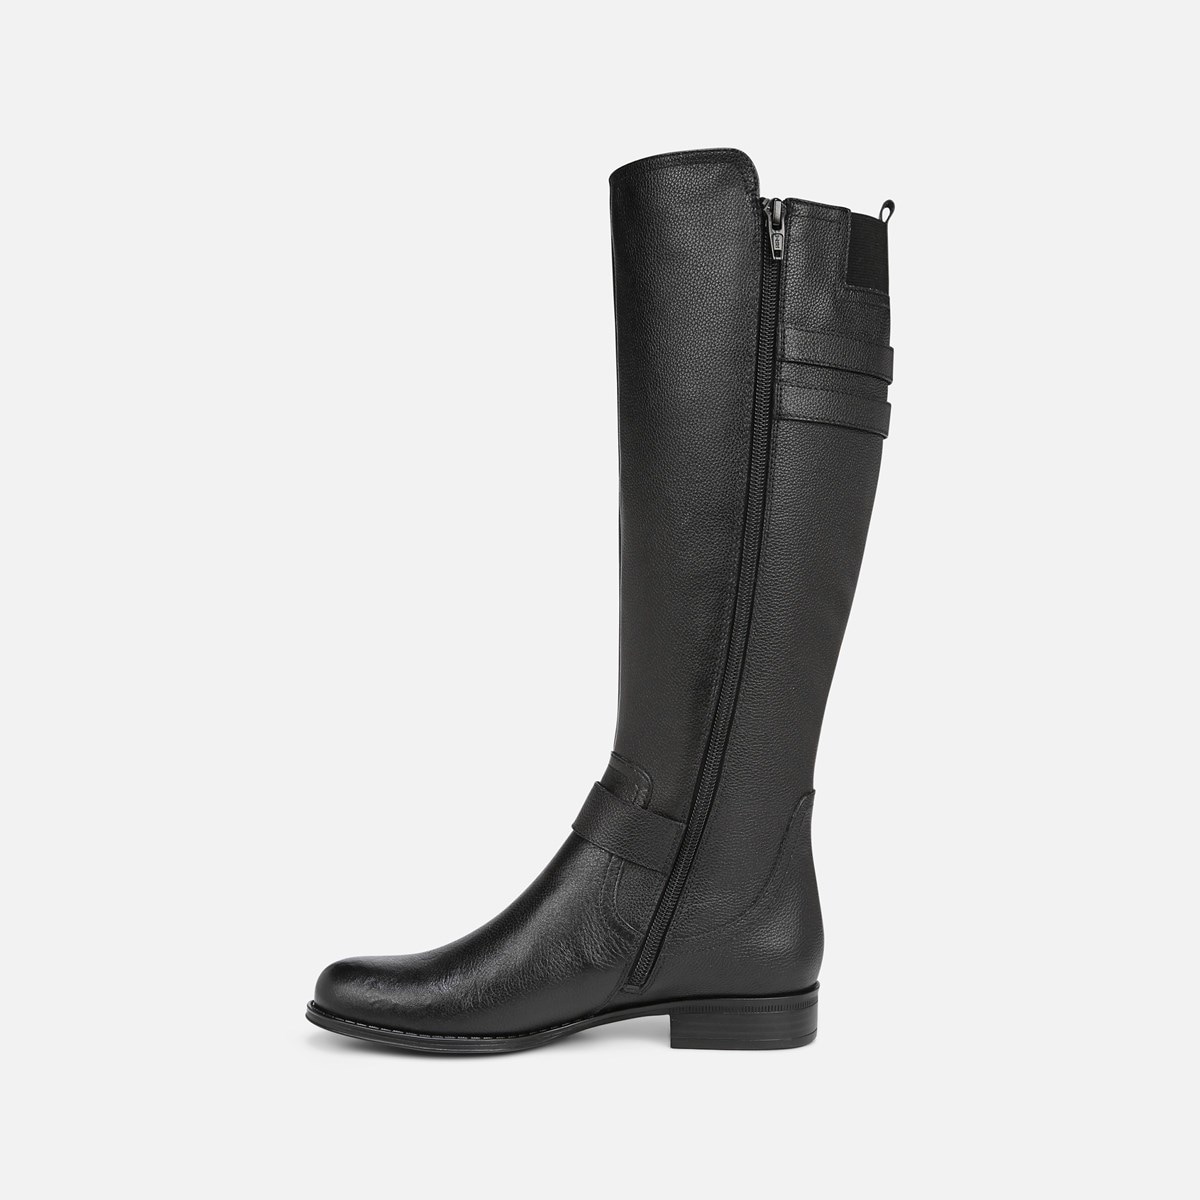 Jessie Wide Calf Riding Boot | peacecommission.kdsg.gov.ng